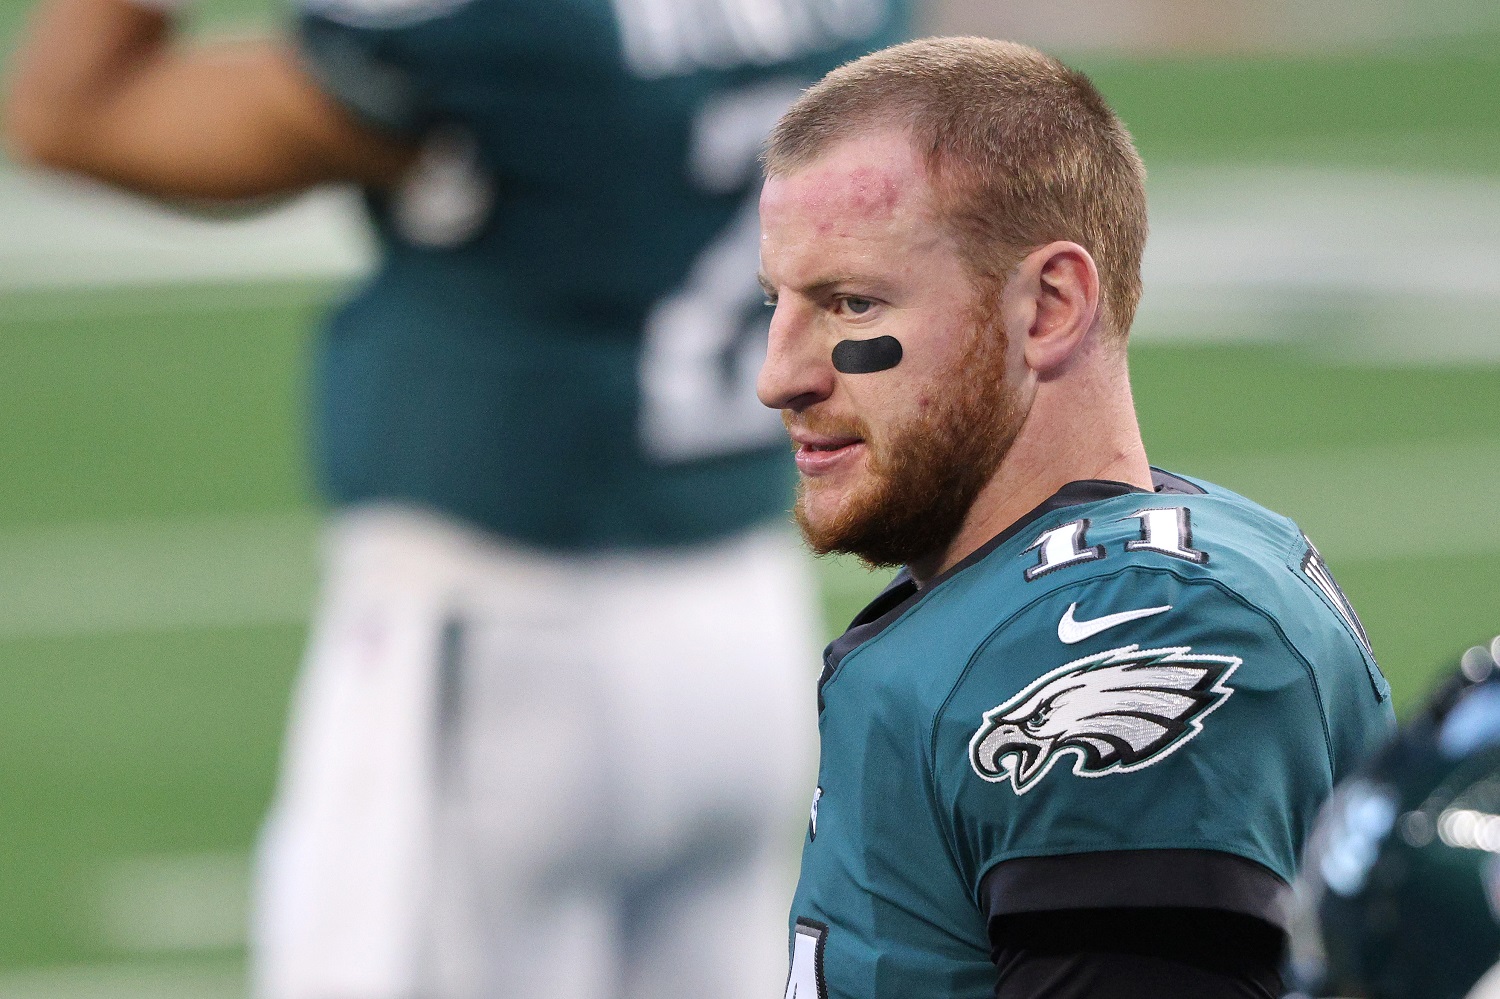 The Philadelphia Eagles benched Carson Wentz late in the 2020 season and now must take a salary-cap hit following his trade.